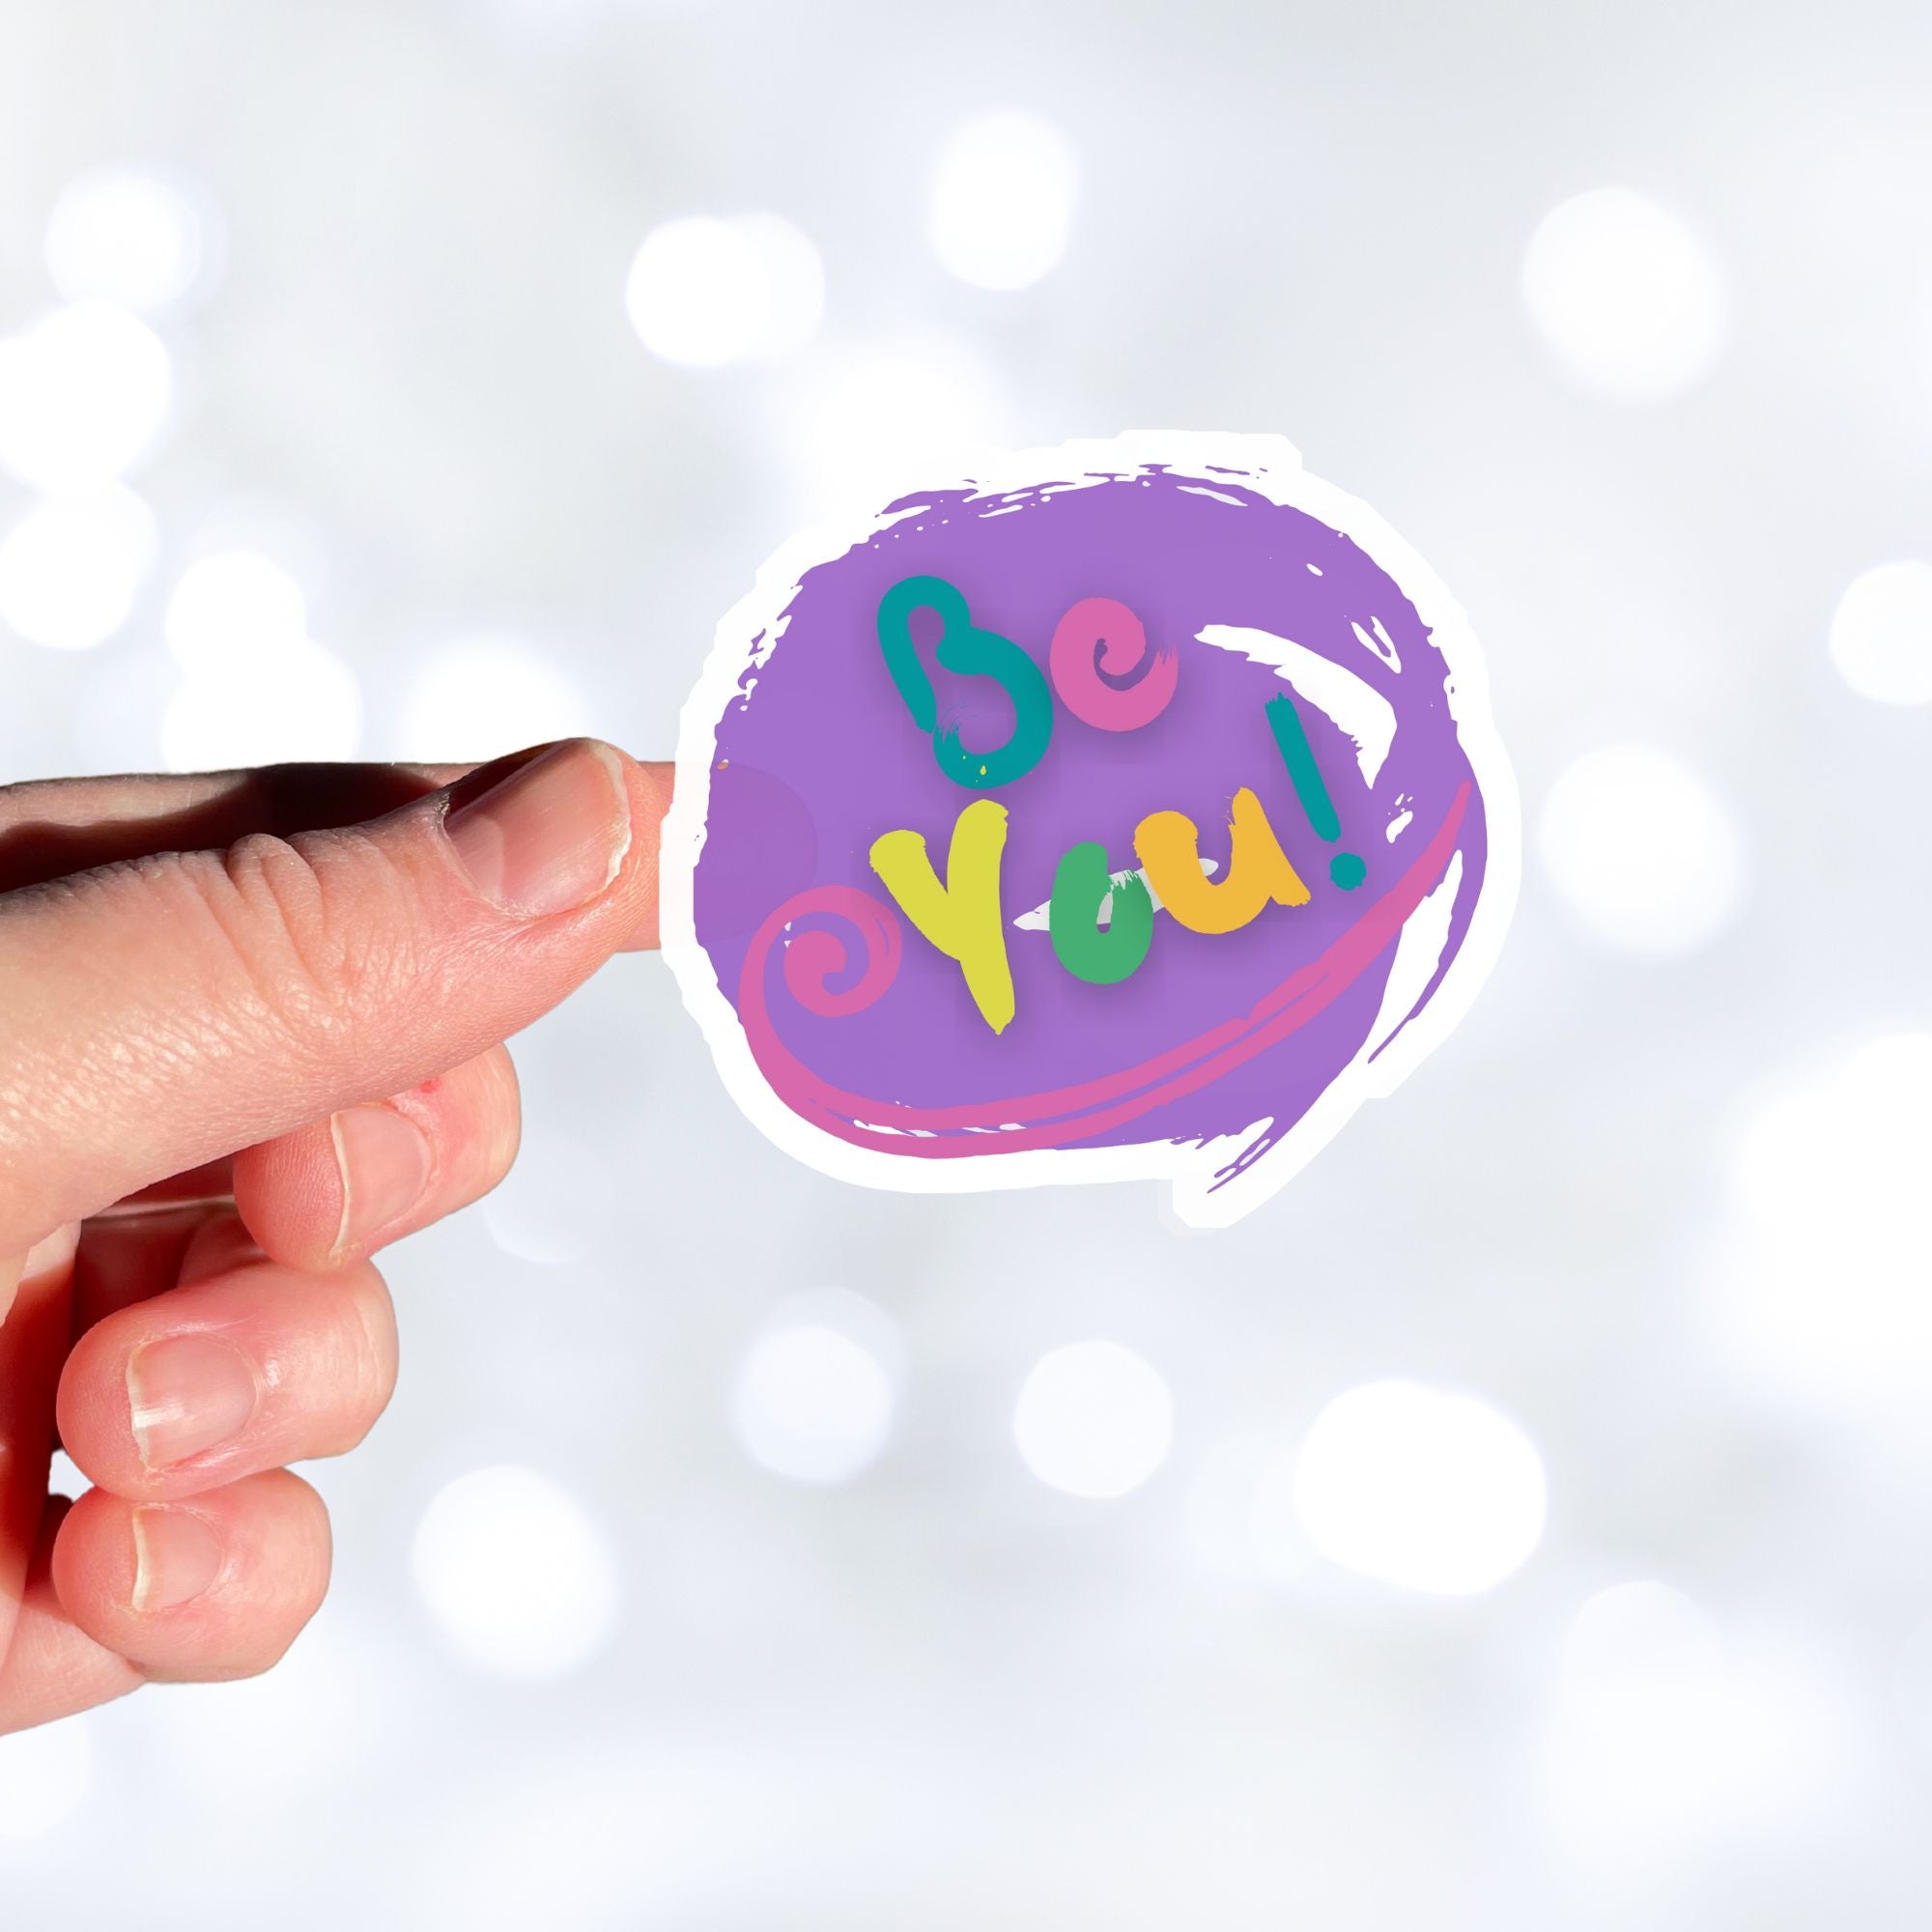 Be You - words to live by! This individual die-cut sticker features "Be You" in multiple pastel colors on a lavender background. This image shows a hand holding the Be You! sticker.